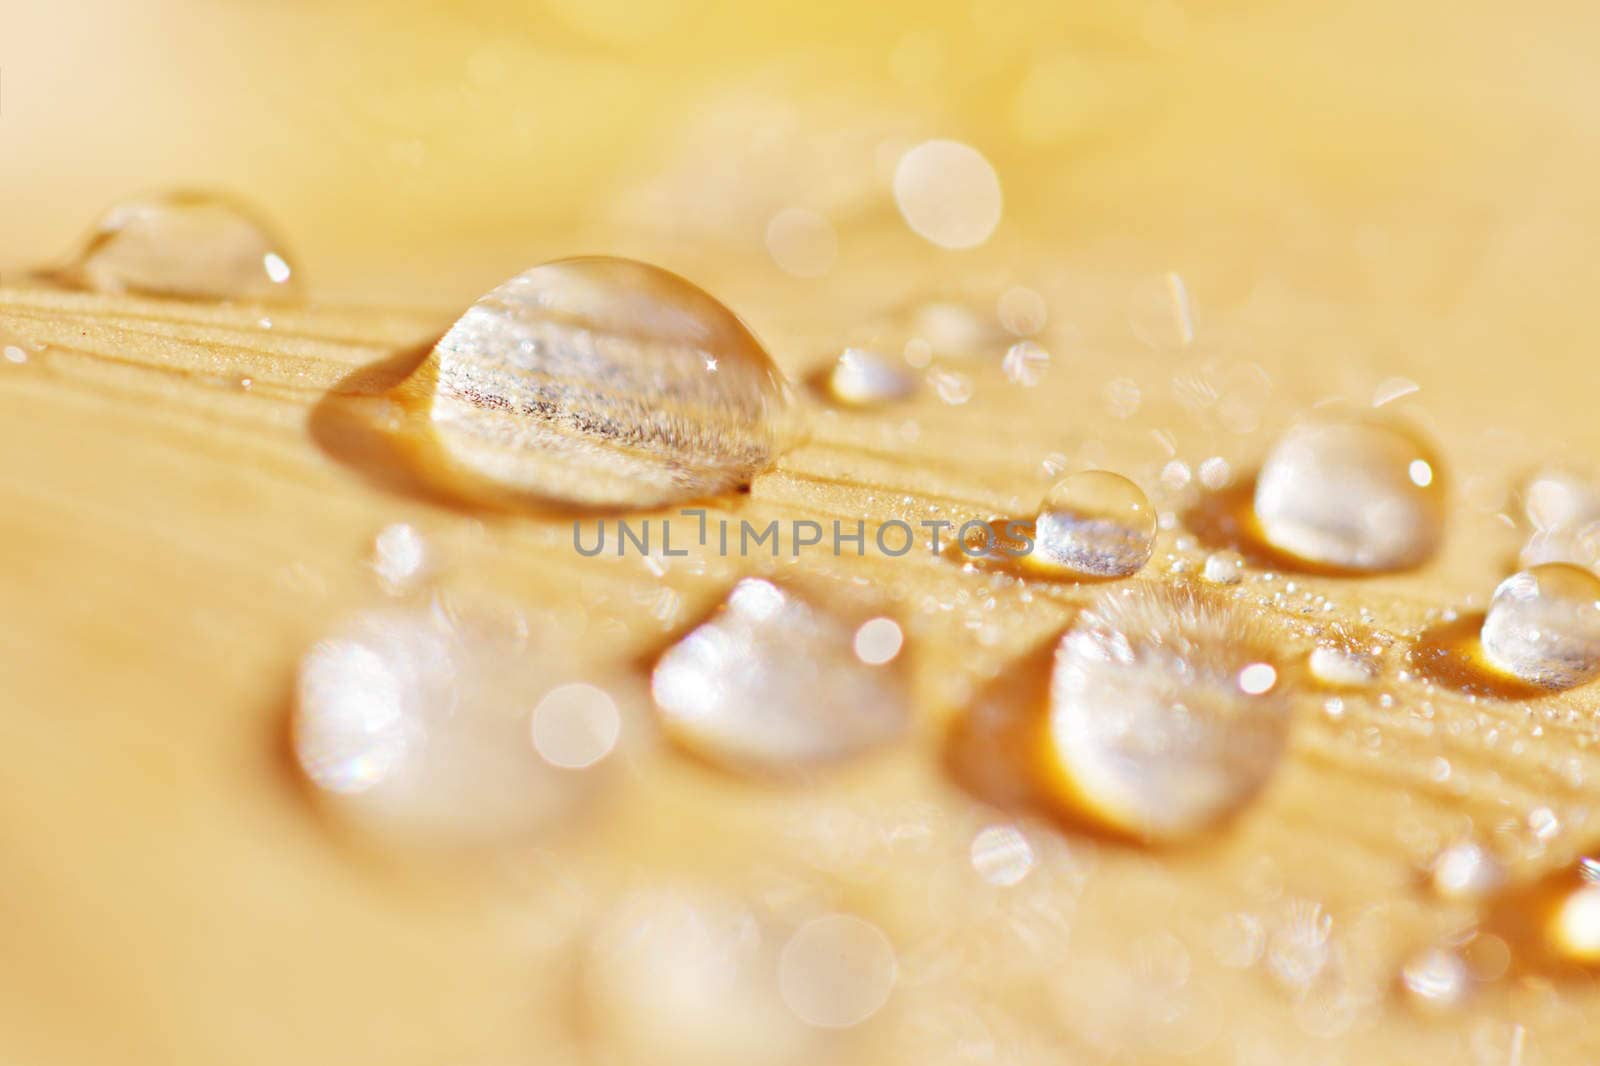 Macro photo of water drops on yellow leaf